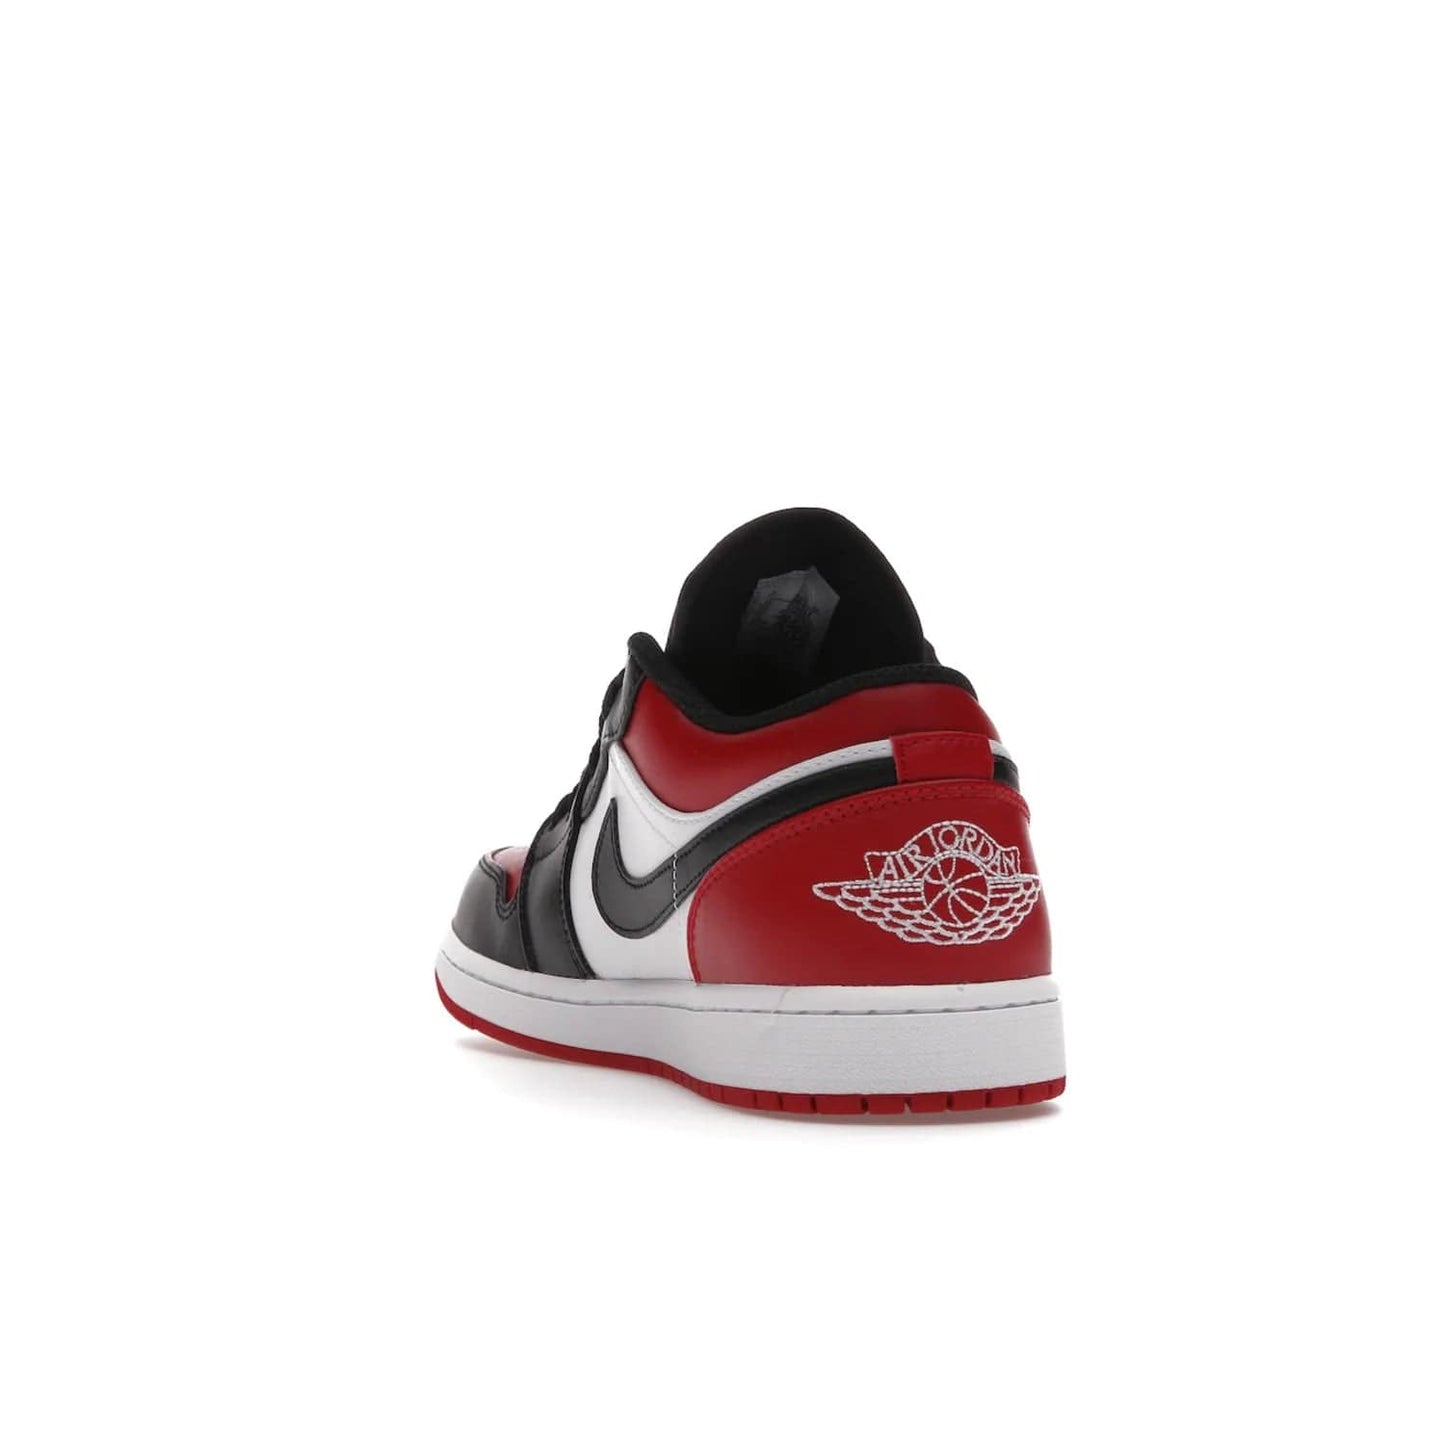 Jordan 1 Low Bred Toe - Image 26 - Only at www.BallersClubKickz.com - Step into the iconic Jordan 1 Retro. Mixing and matching of leather in red, black, and white makes for a unique colorway. Finished off with a Wing logo embroidery & Jumpman label. Comfortable and stylish at an affordable $100, the Jordan 1 Low Bred Toe is perfect for any true sneaker fan.